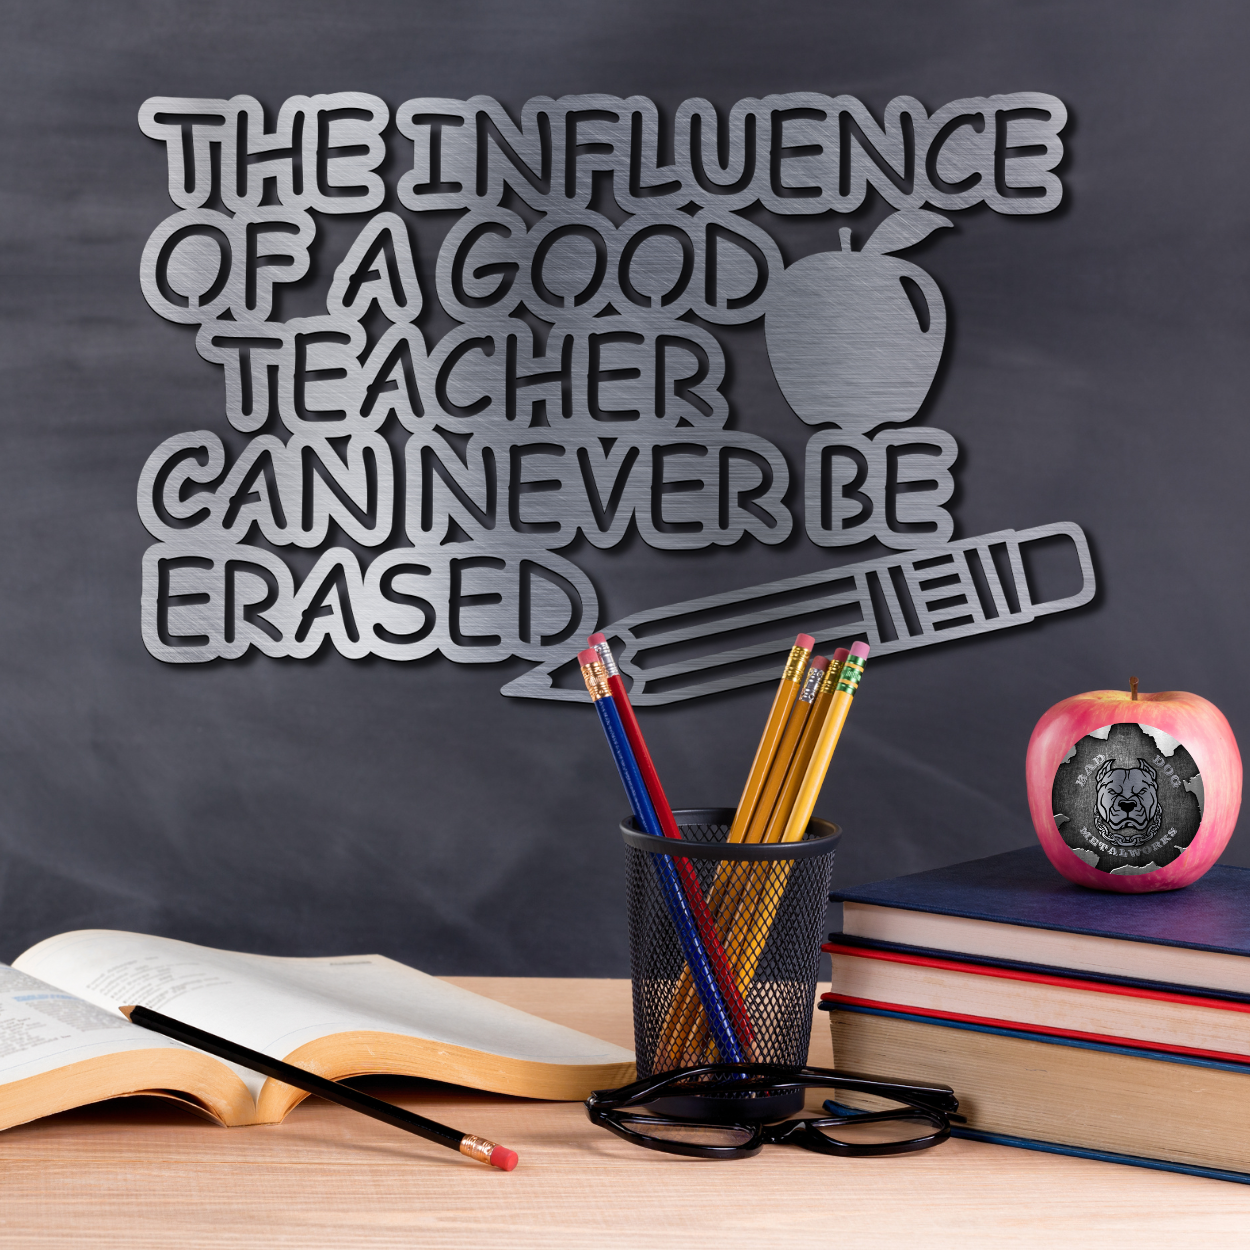 The Influence of a Good Teacher Can Never Be Erased